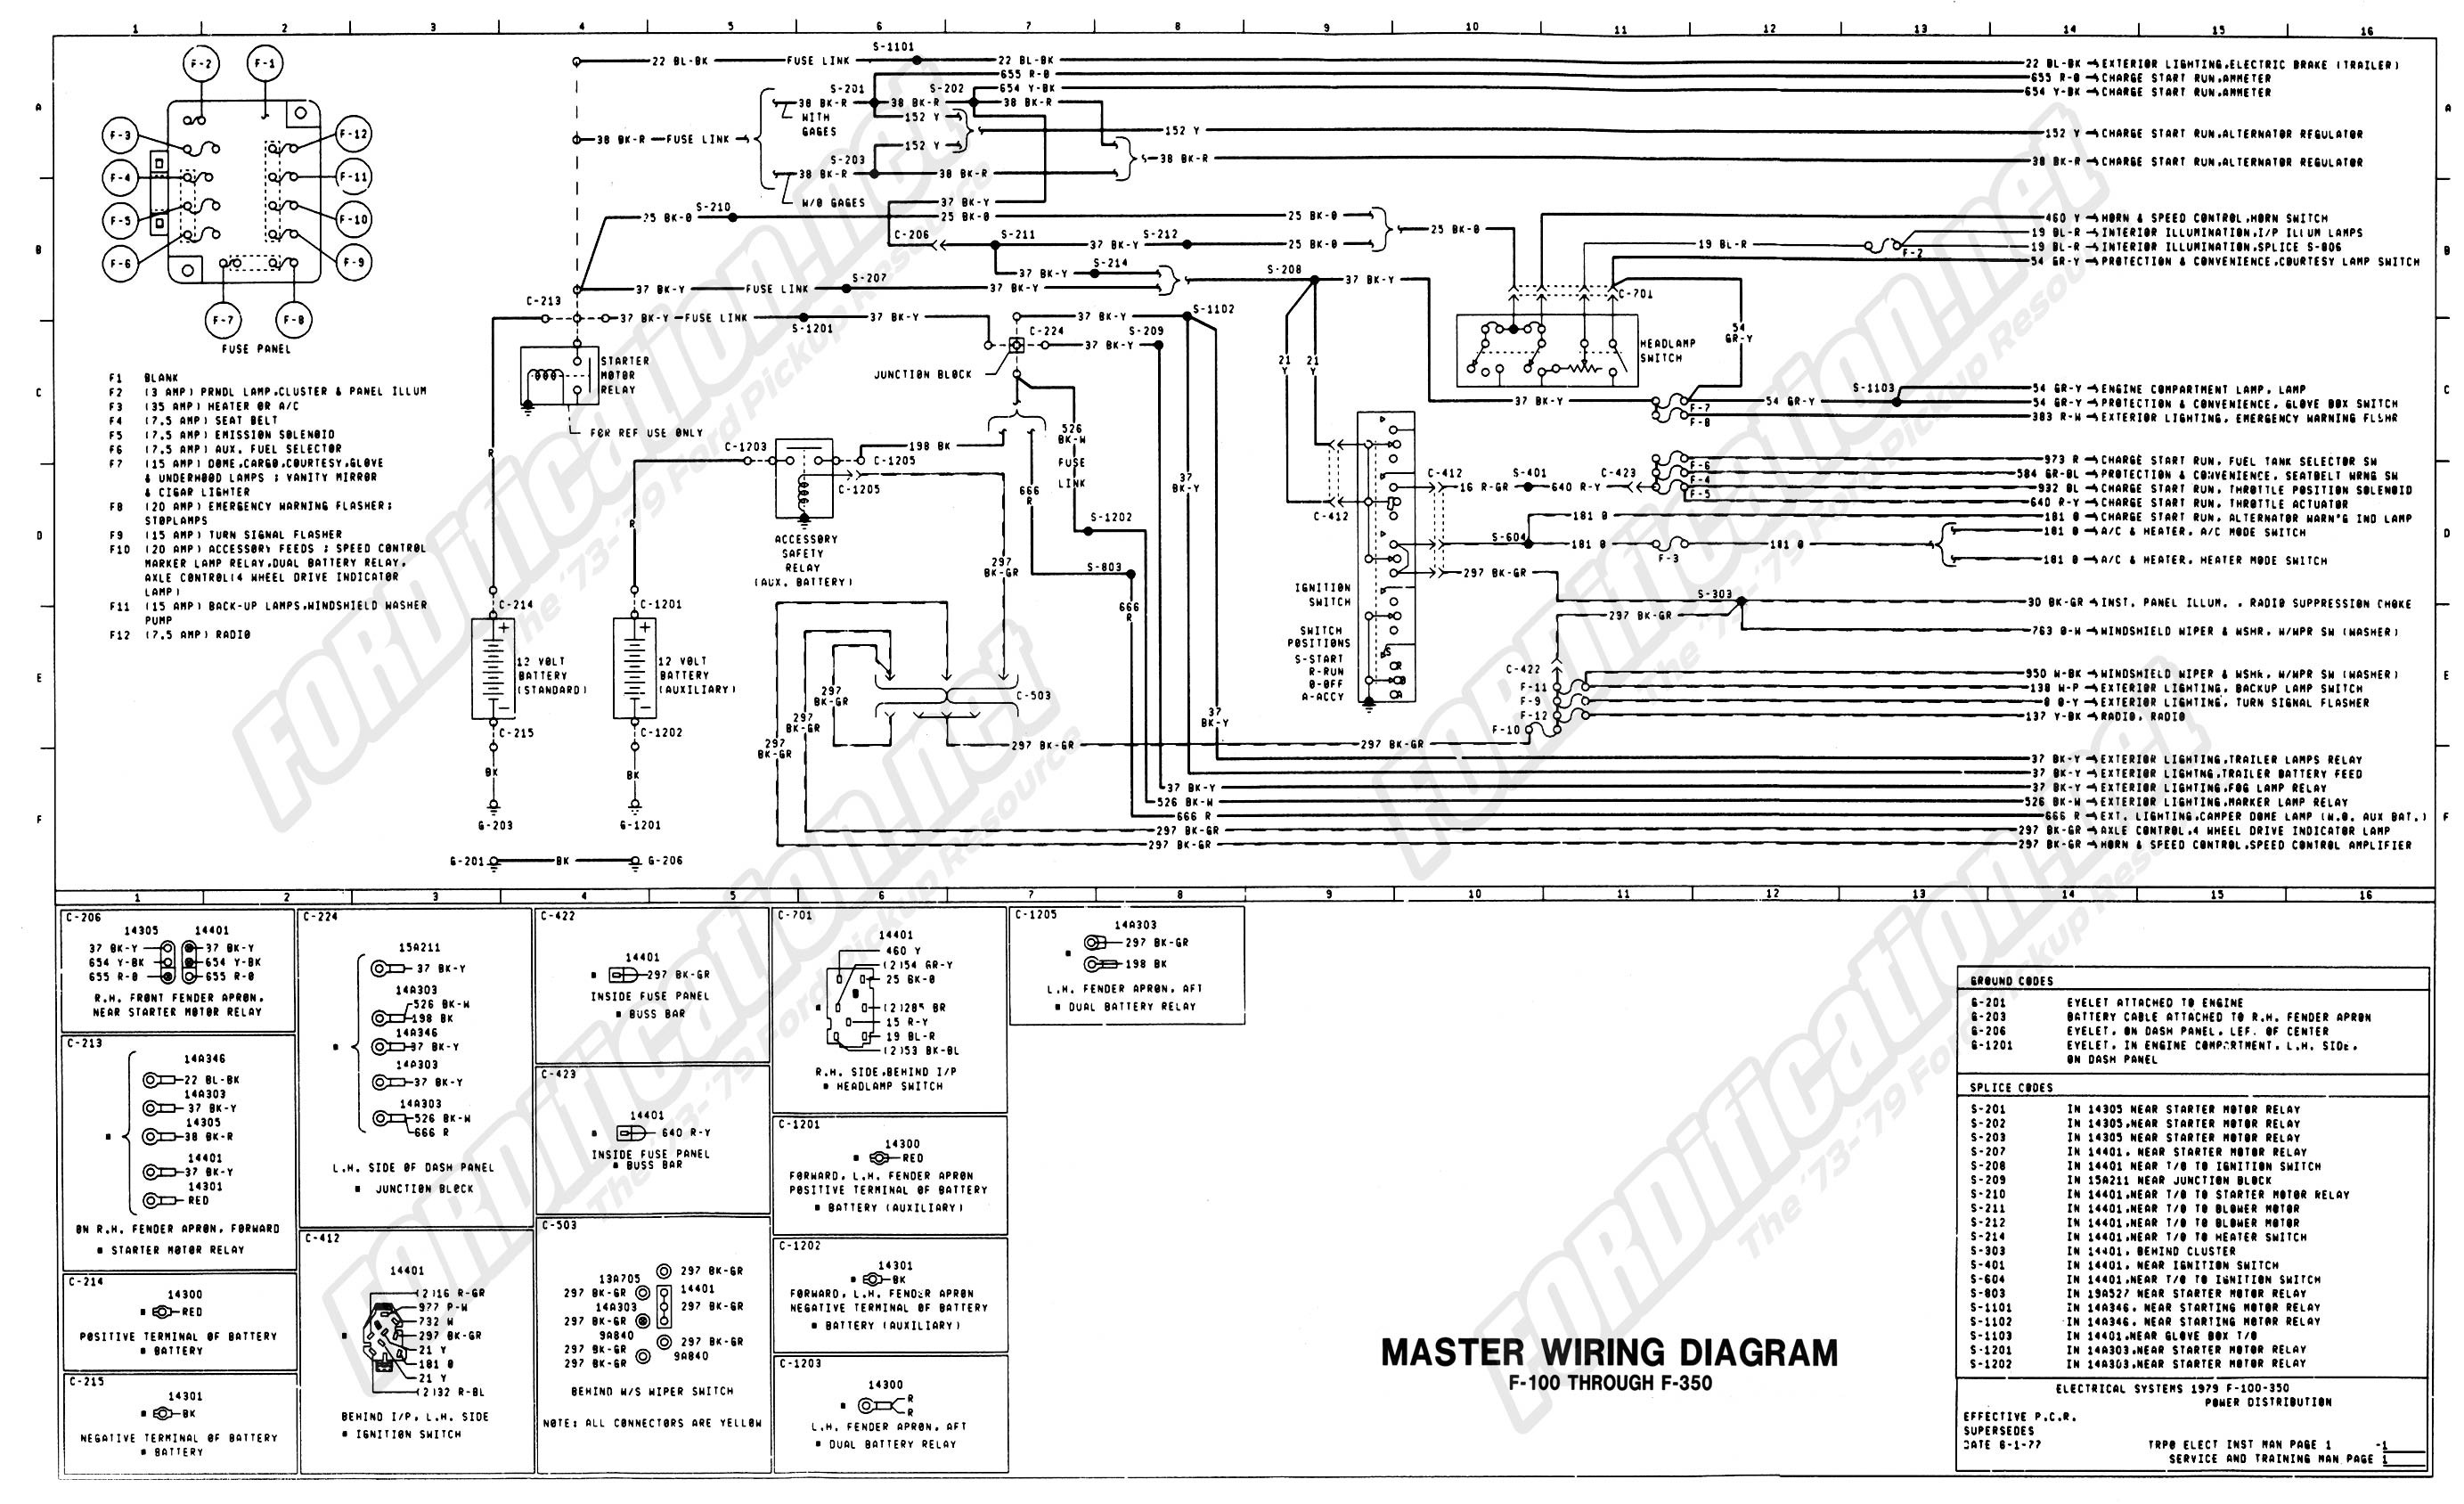 Remote Start Wiring Diagrams E340 ford F 1 Wiring Diagram Of Remote Start Wiring Diagrams